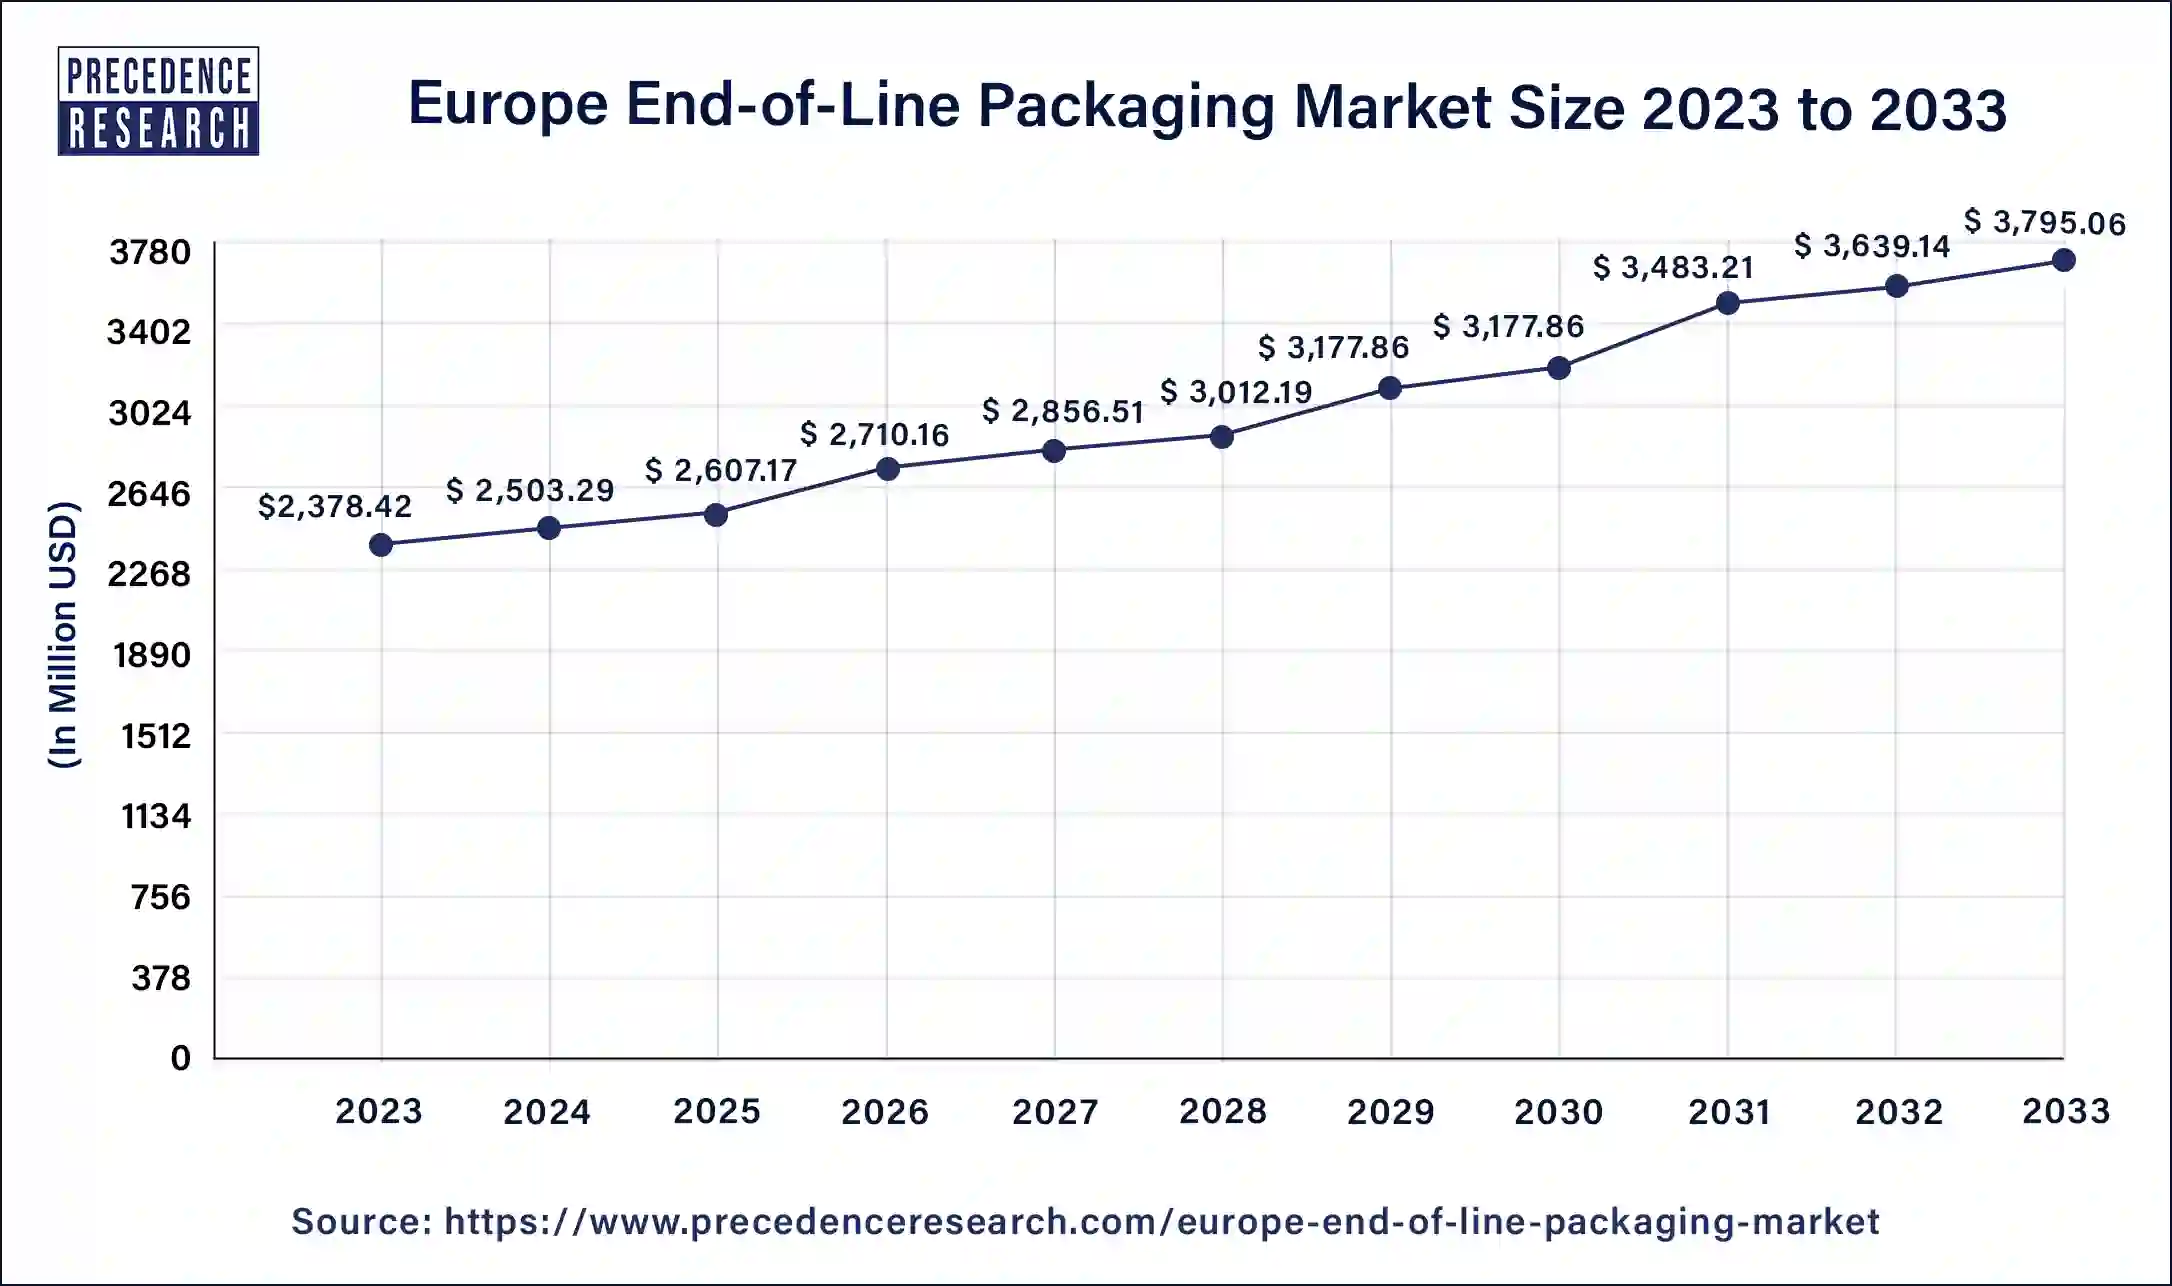 Europe End-of-Line Packaging Market Size 2024 to 2033